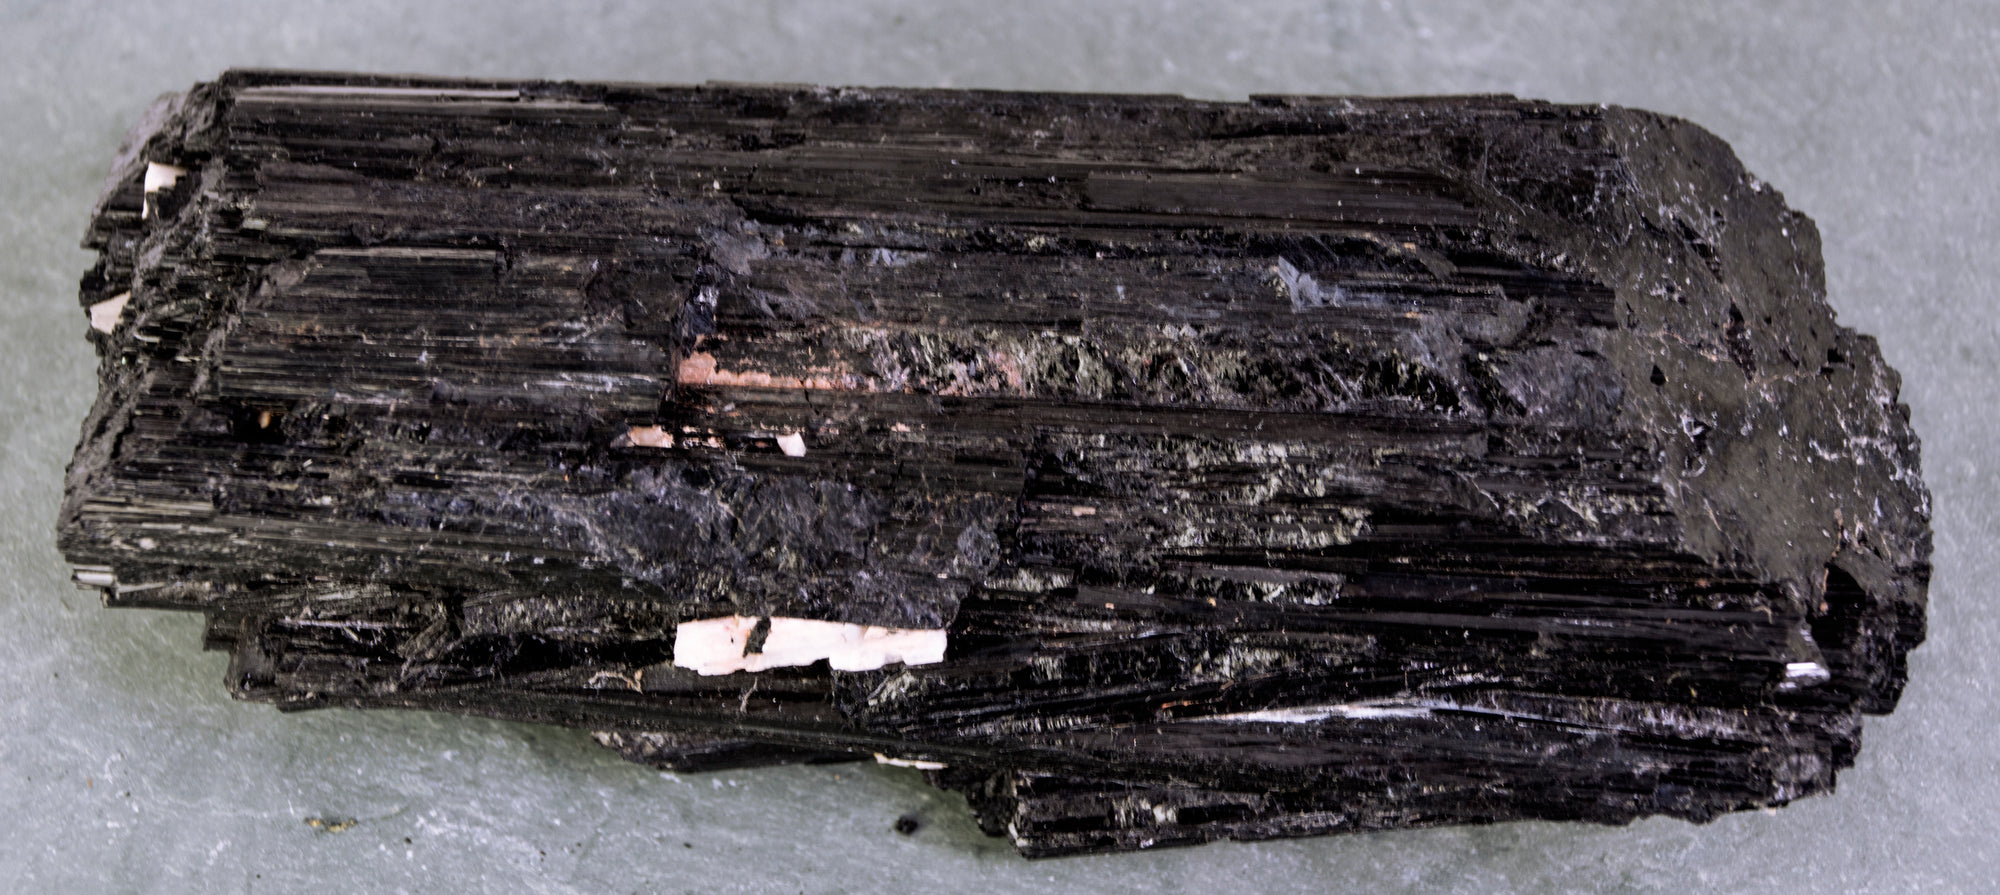 Working with Crystals: Black Tourmaline (Throwback Thursday)